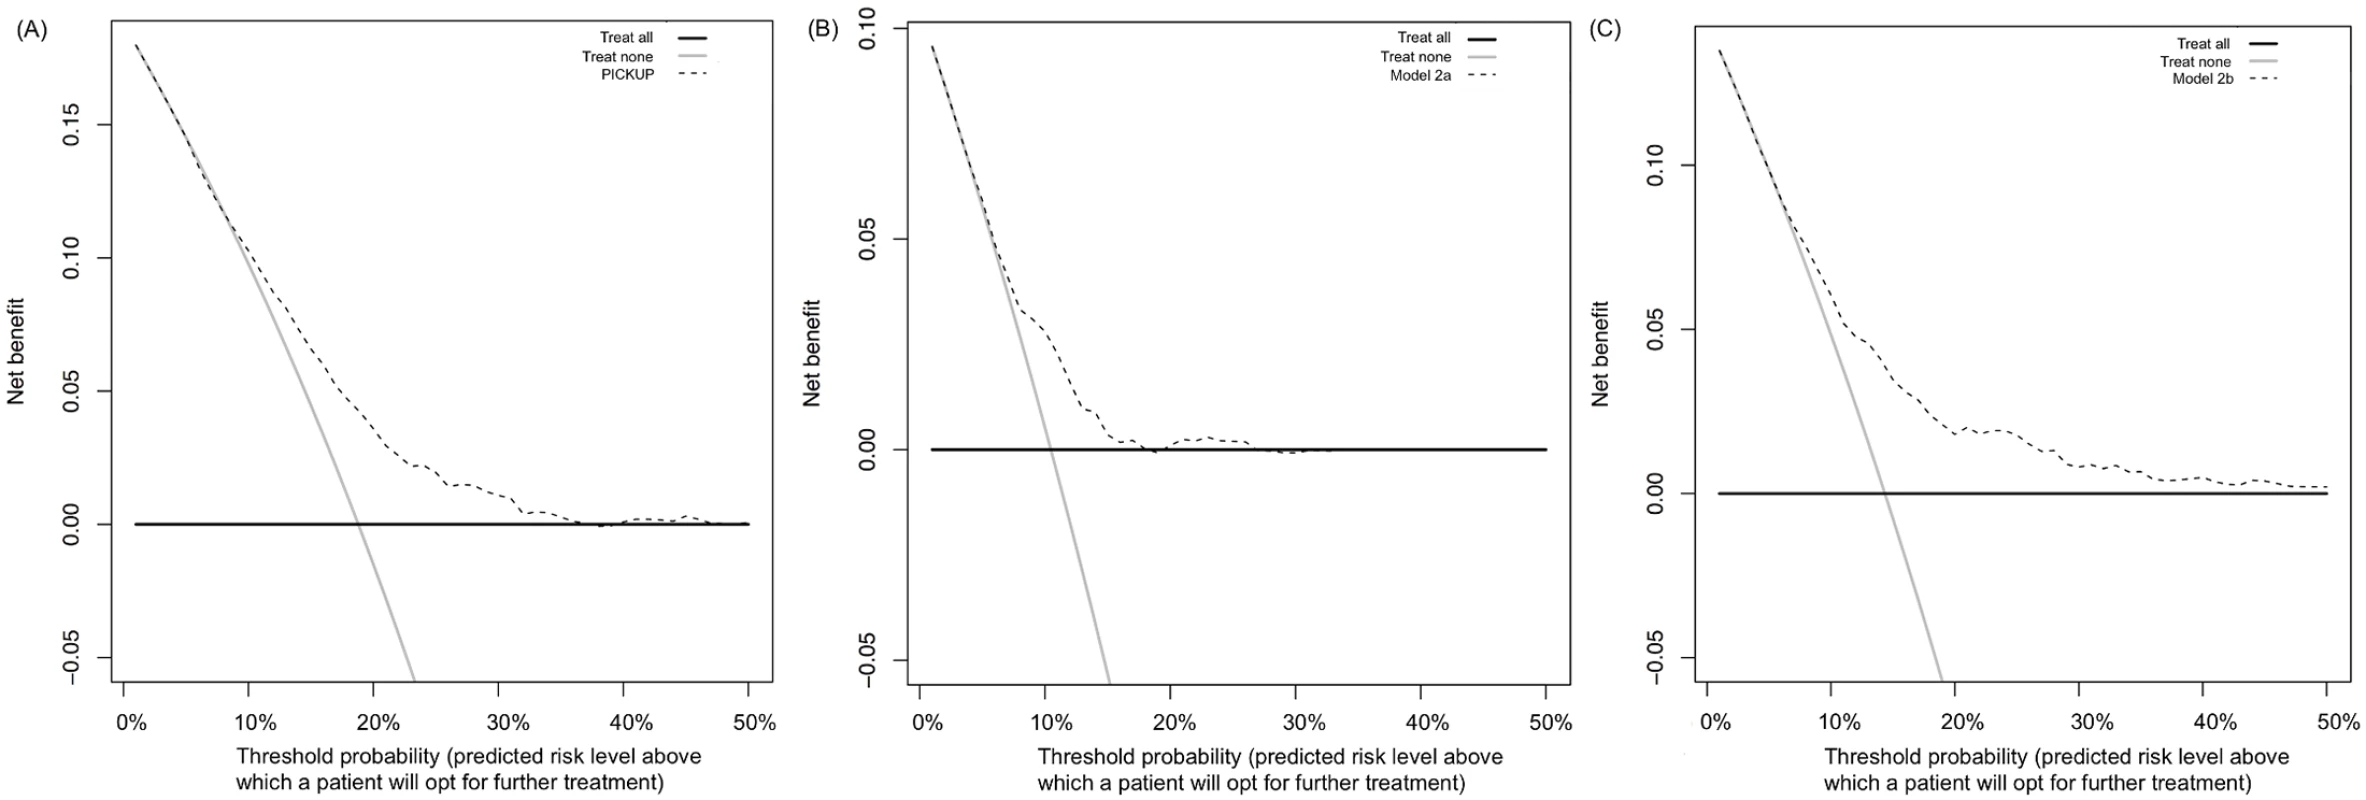 Decision curve analysis for the three prognostic models in the external validation sample.